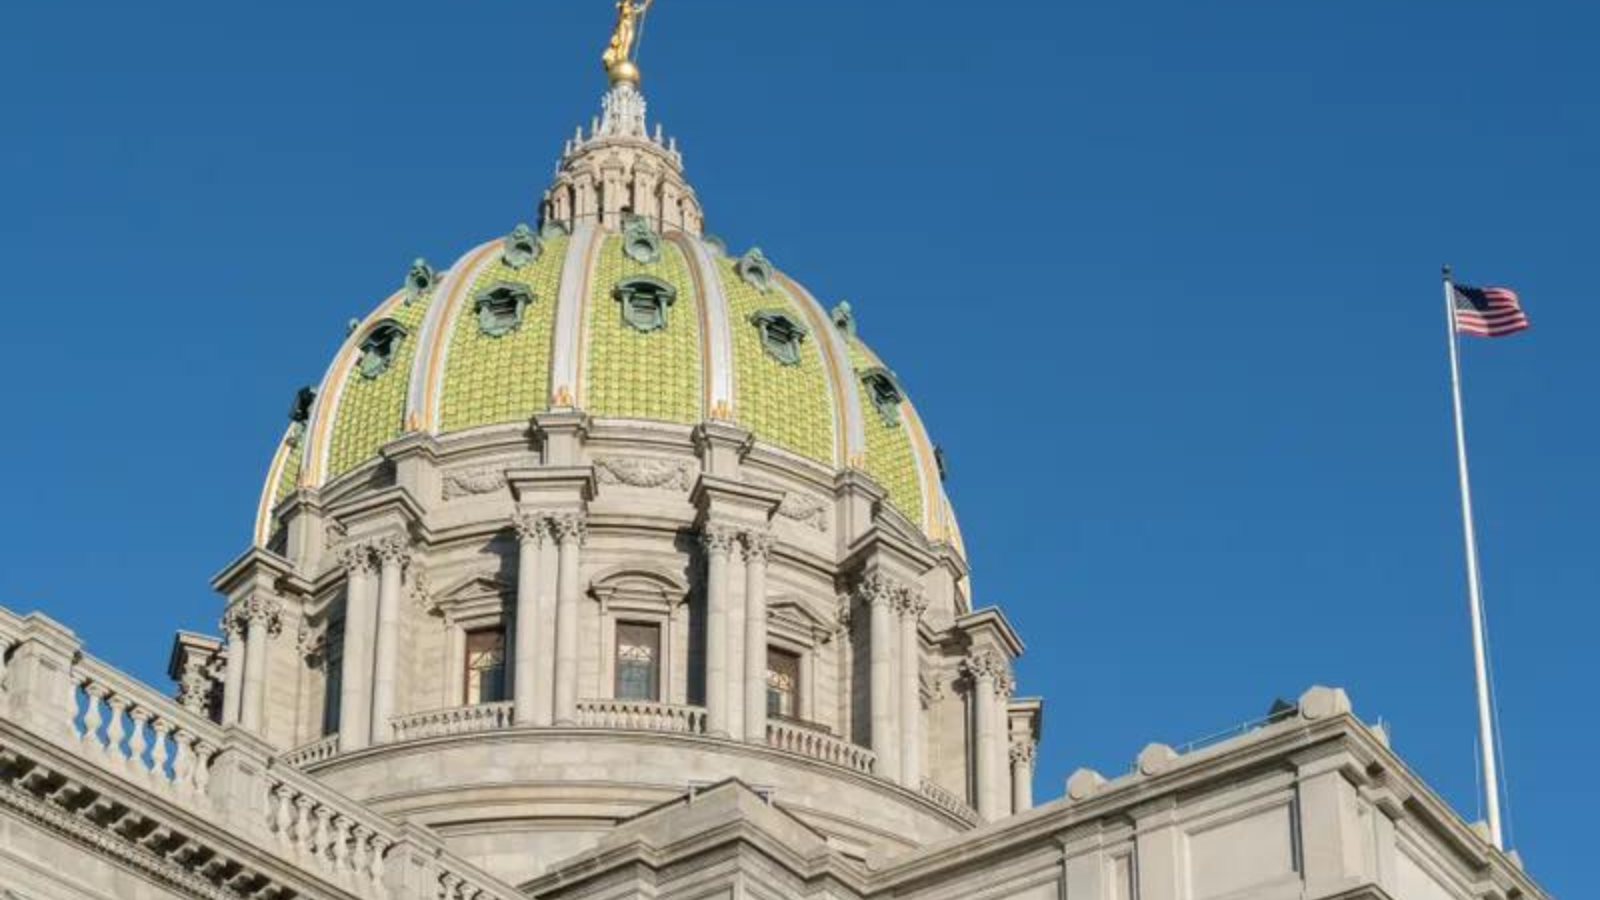 Pa. Republicans, Democrats battle over tax cuts, education funding as budget deadline looms